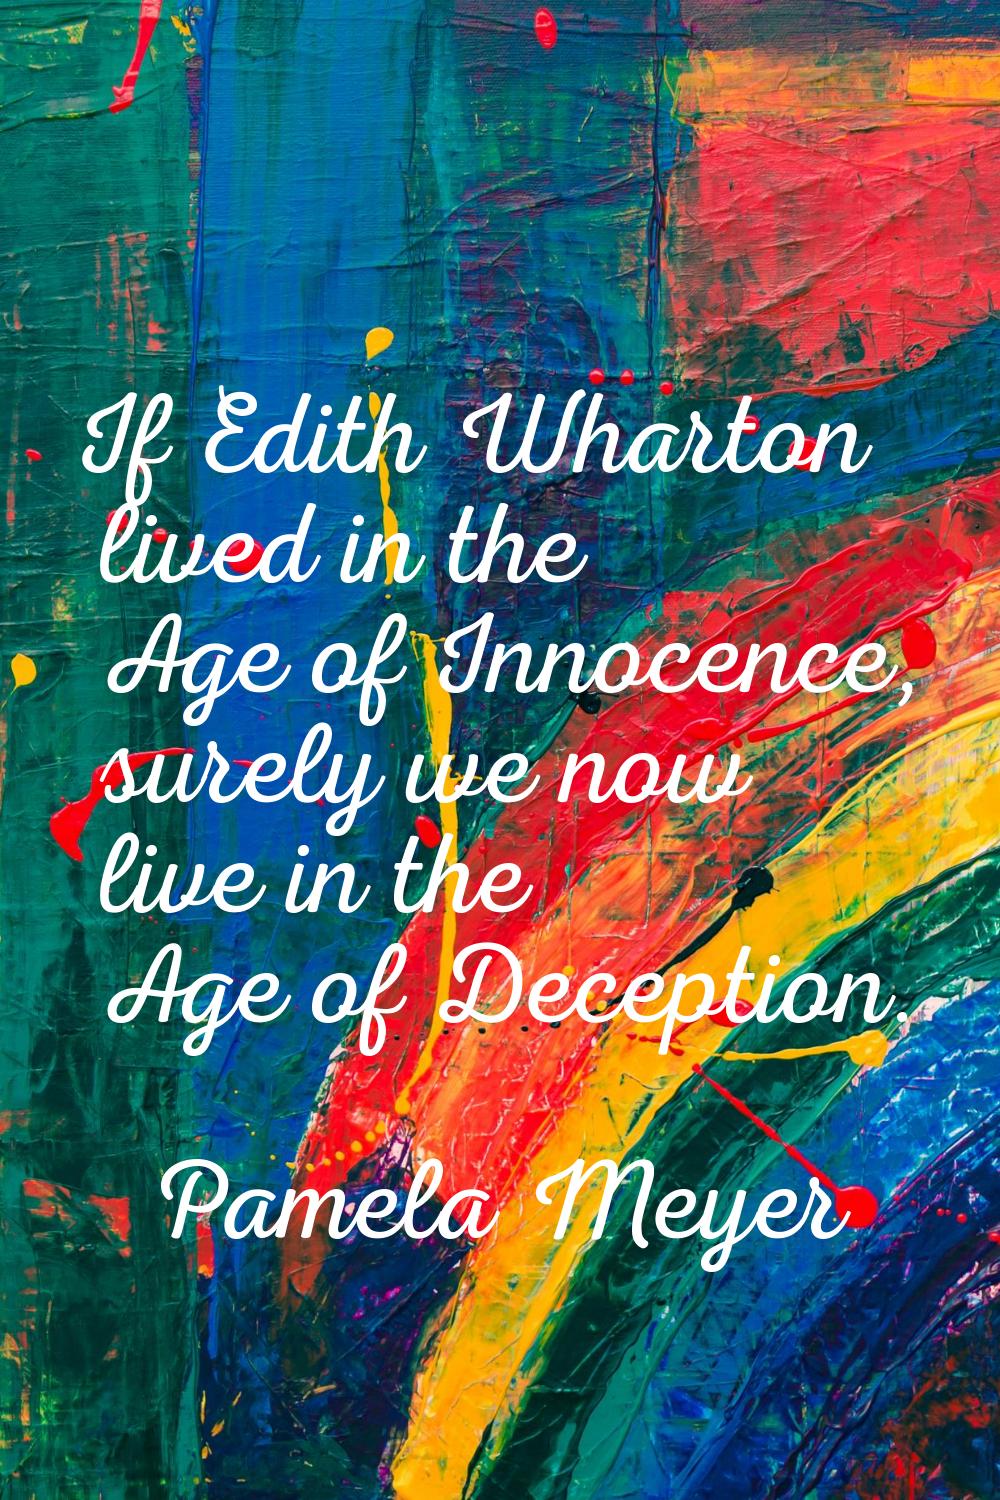 If Edith Wharton lived in the Age of Innocence, surely we now live in the Age of Deception.